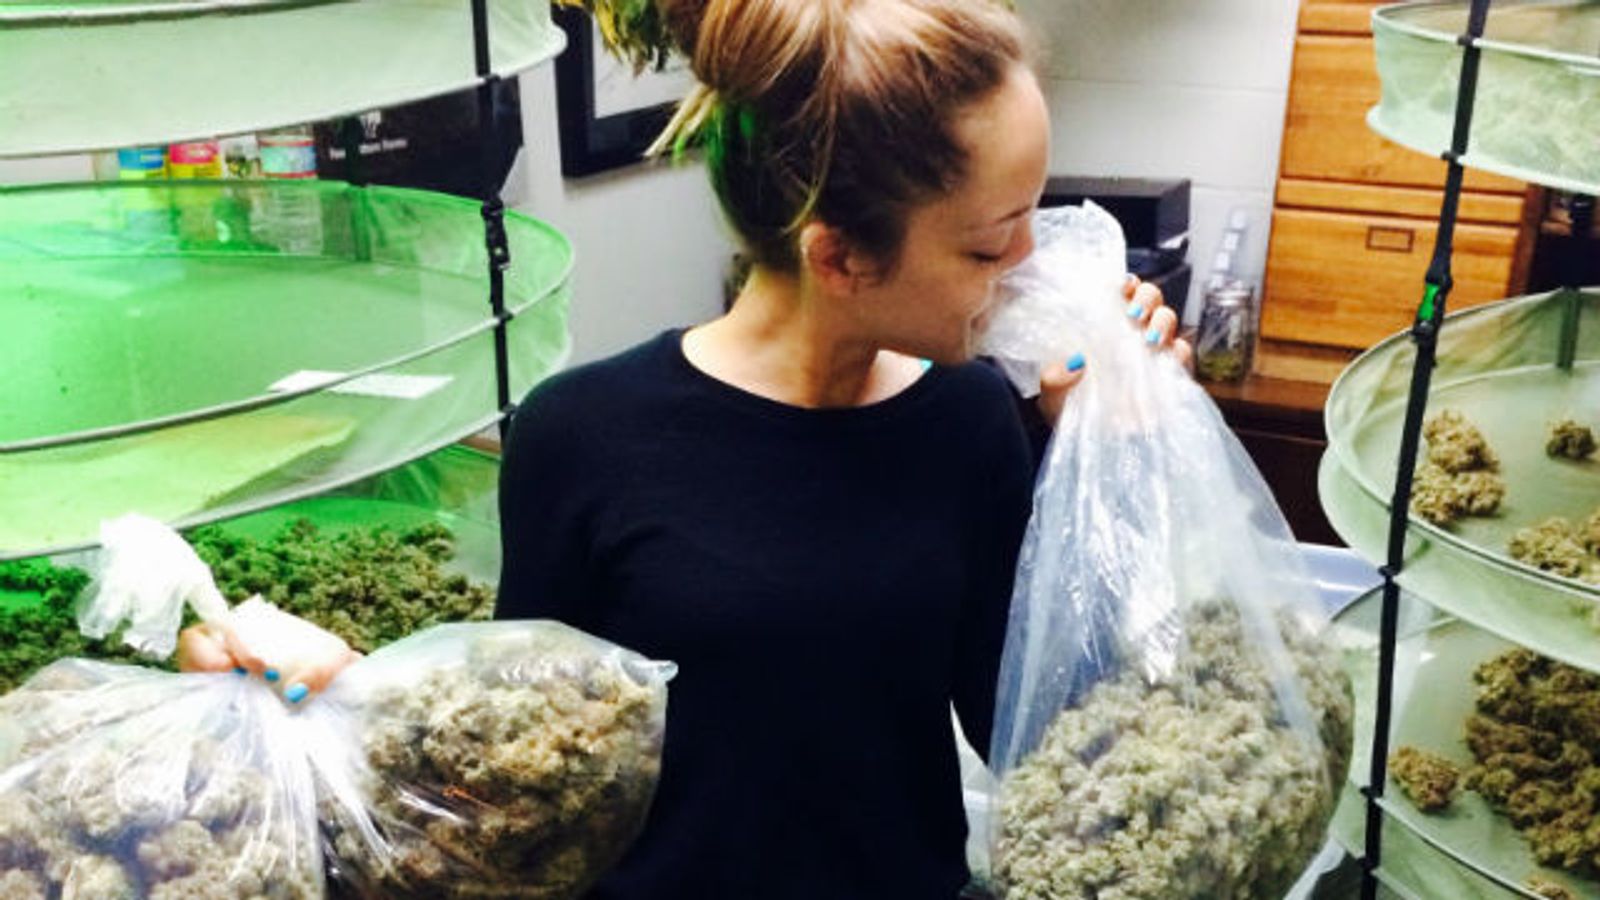 Remy LaCroix to Appear at San Francisco Cannabis Cup